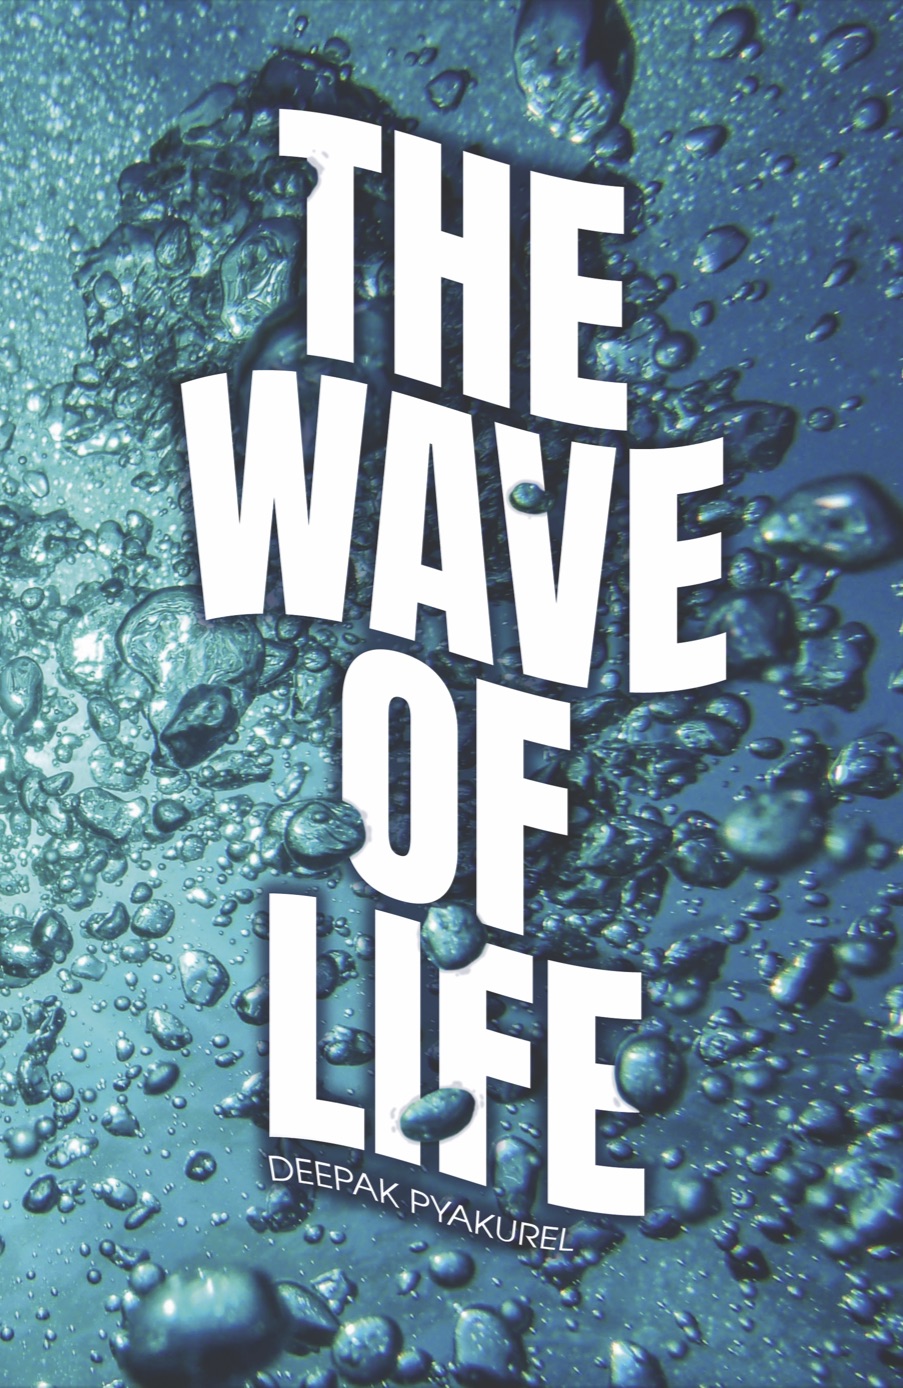 The Wave of Life